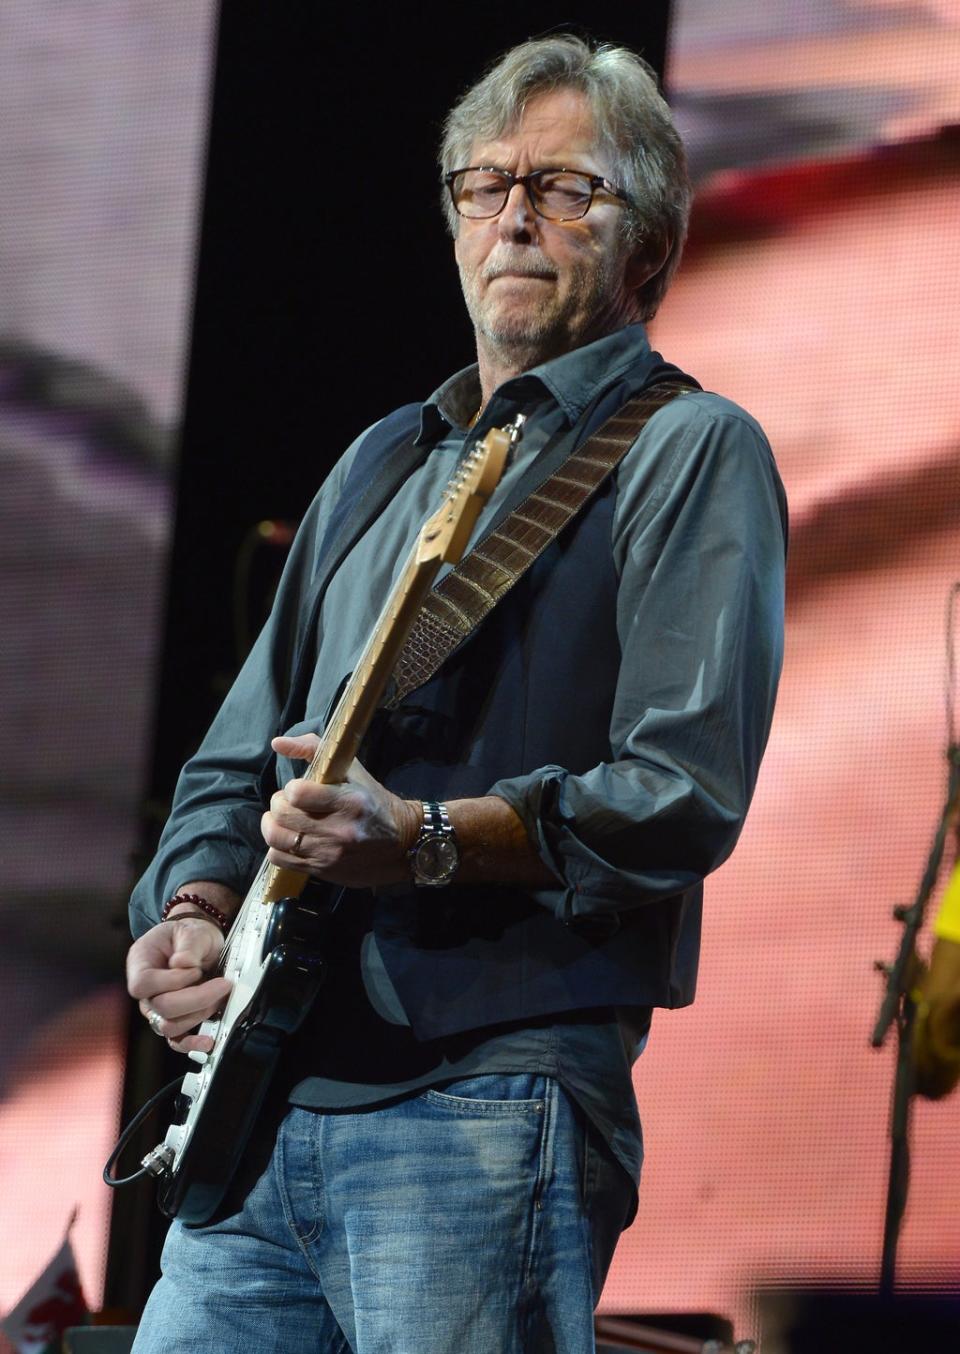 Eric Clapton has been vocal in the past about being against the Covid-19 vaccine (Getty Images)